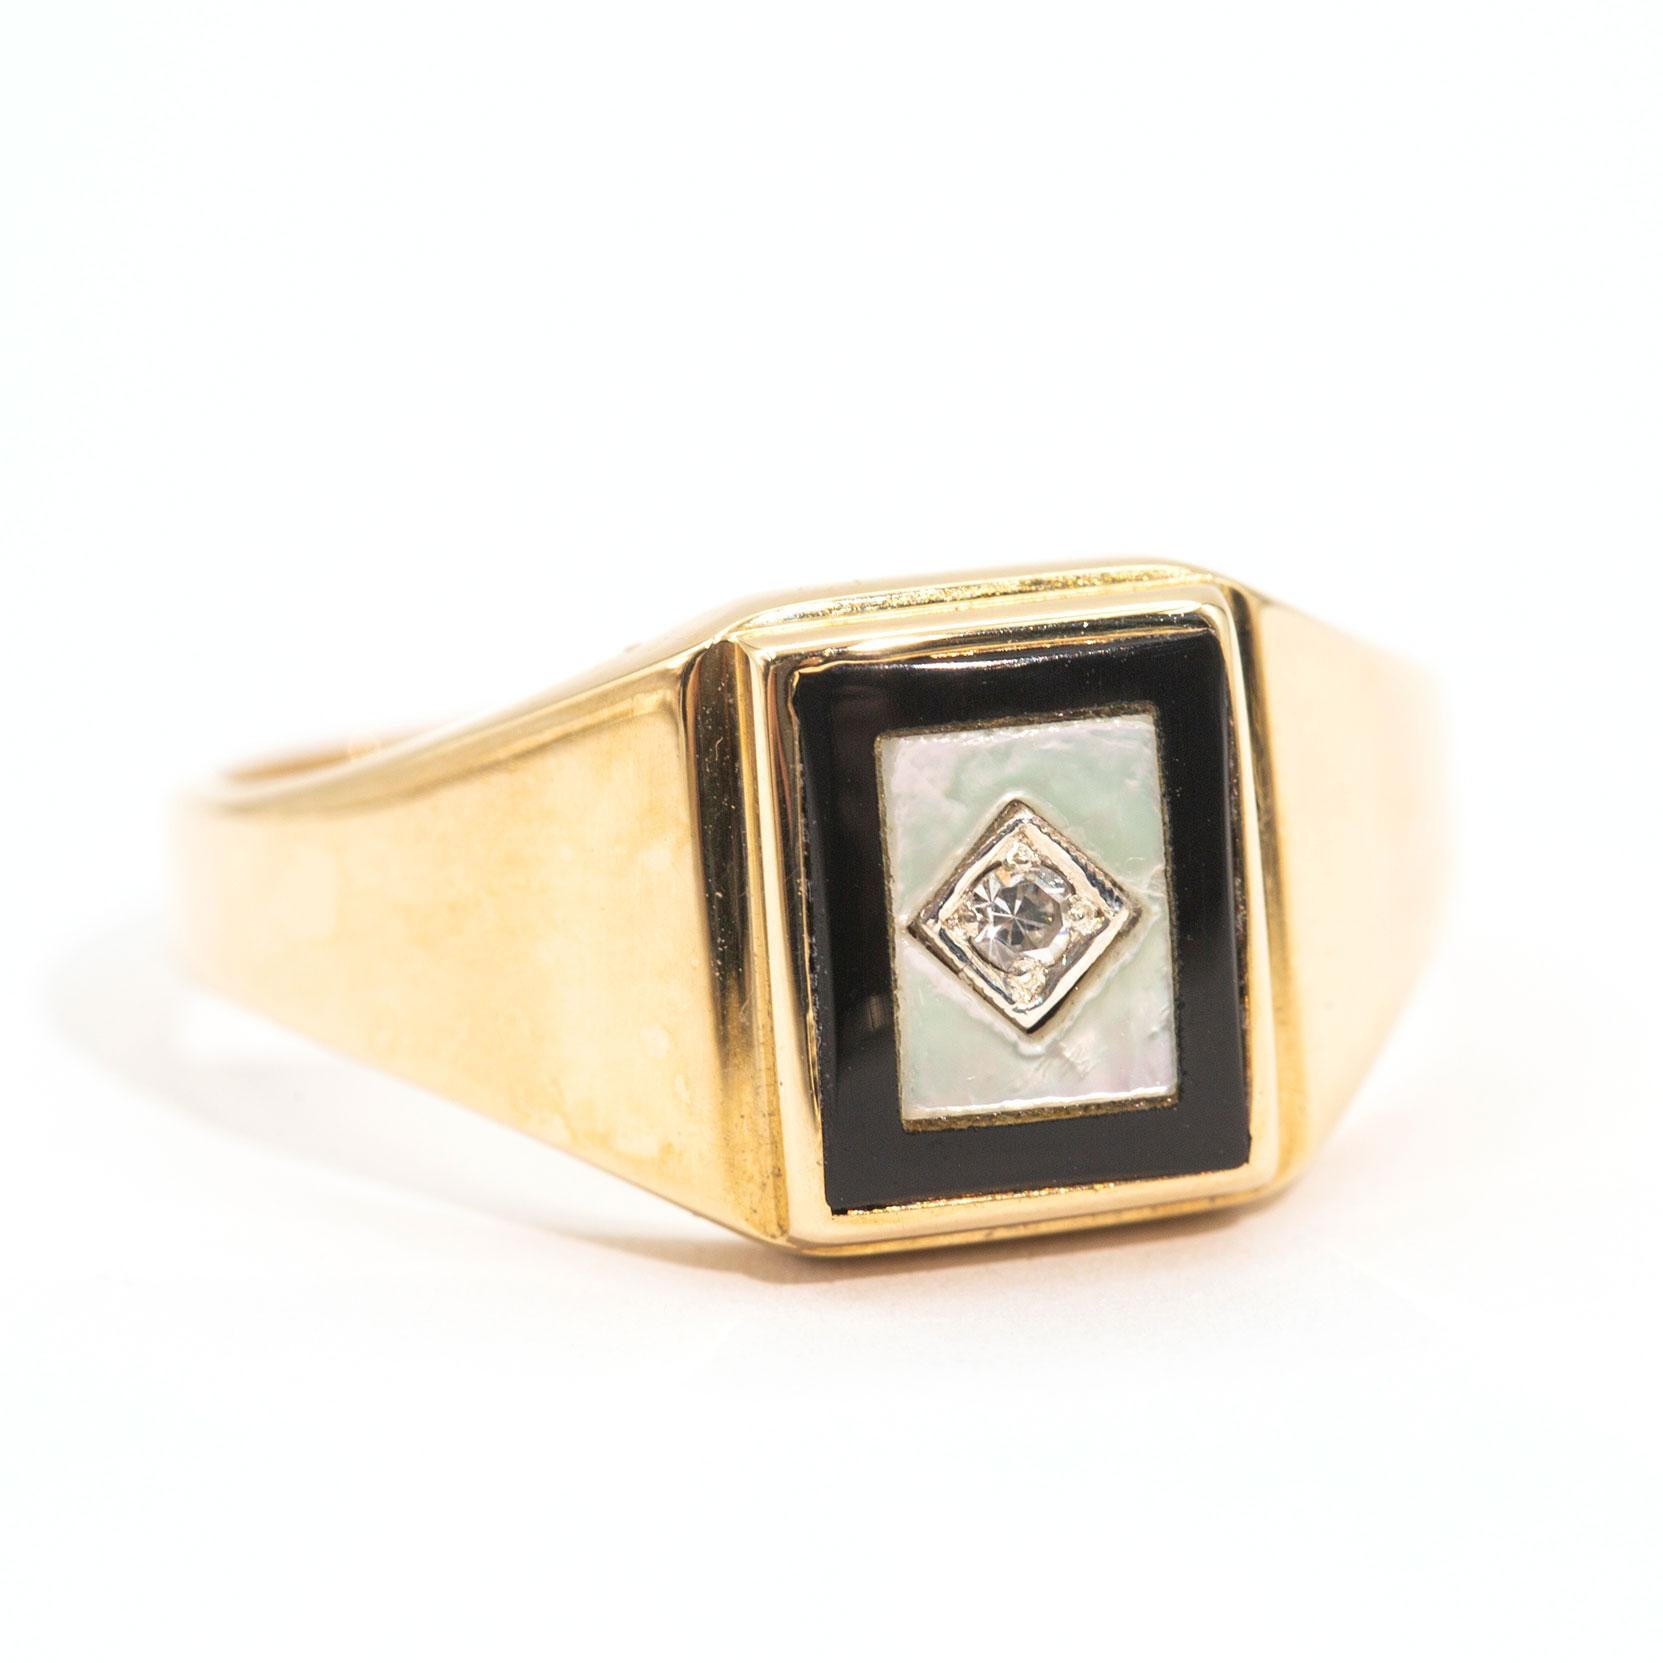 Forged in 9 carat yellow gold this handsome vintage mens signet ring features a mother of pearl and an onyx top, finely finished with round brilliant cut diamond in the centre. We have named this dapper ring the Peterson Ring.  The Peterson ring is